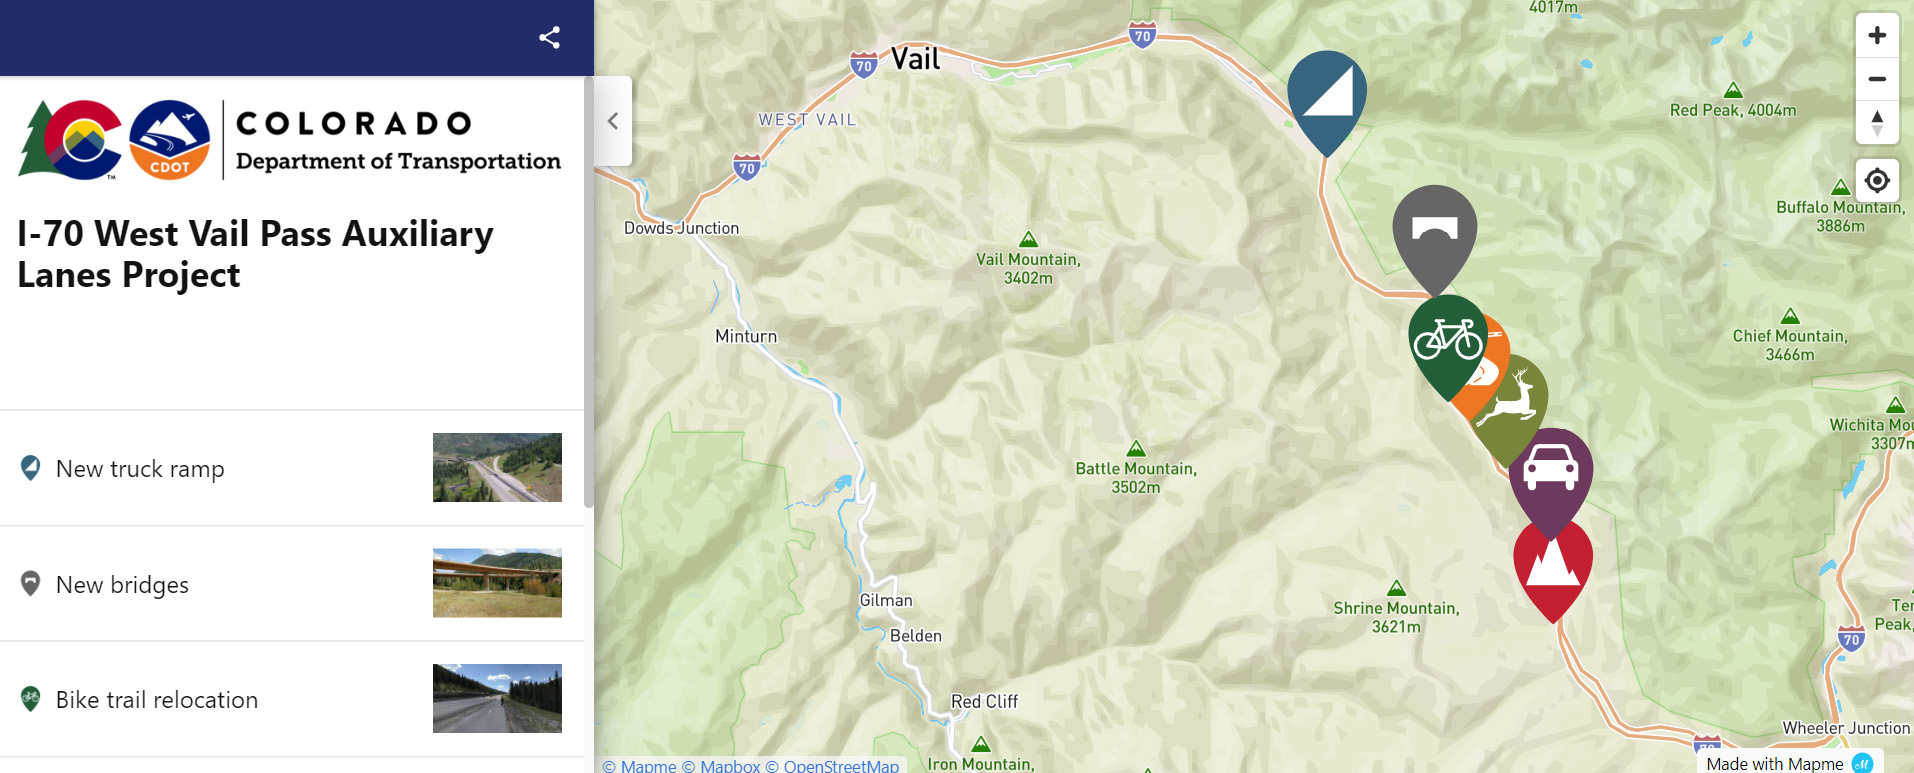 West Vail Pass Map.jpg detail image